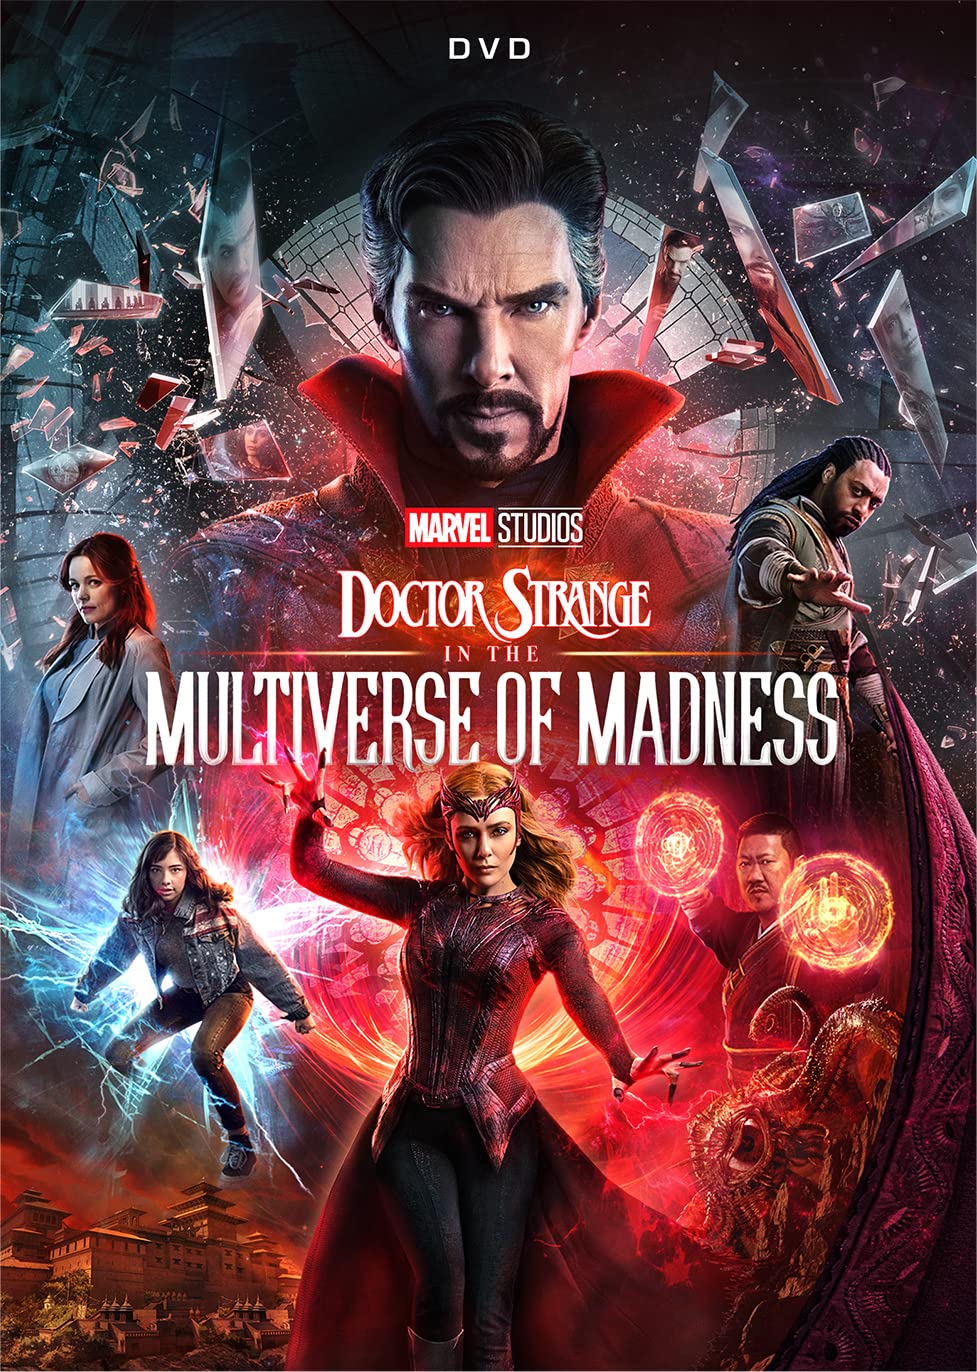 Doctor Strange in the Multiverse of Madness Blu-ray DVD